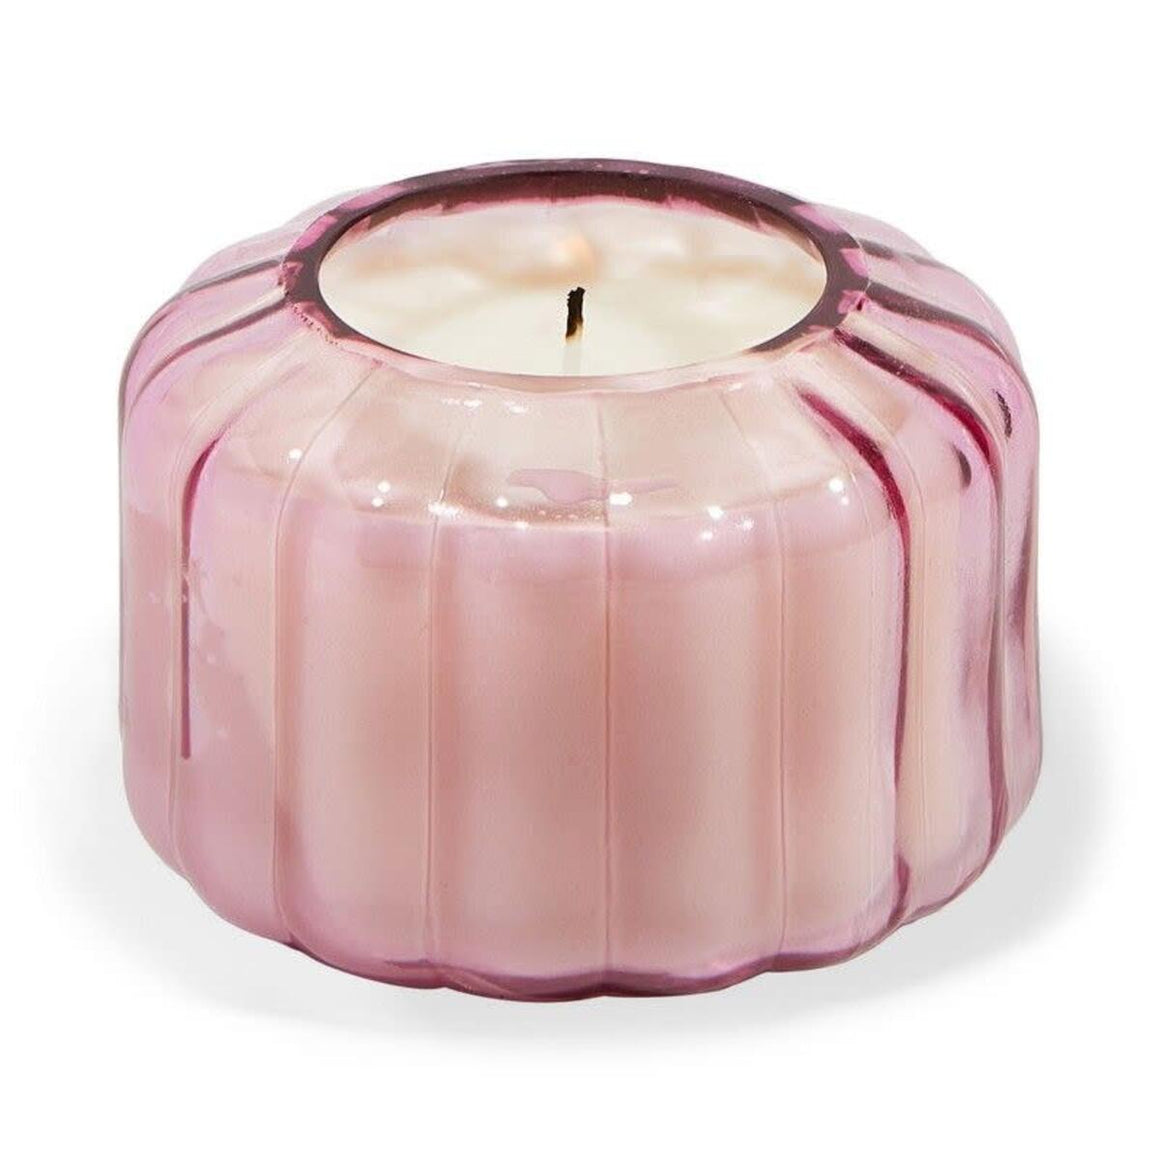 Candle | Paddywax ribbed glass | Desert peach